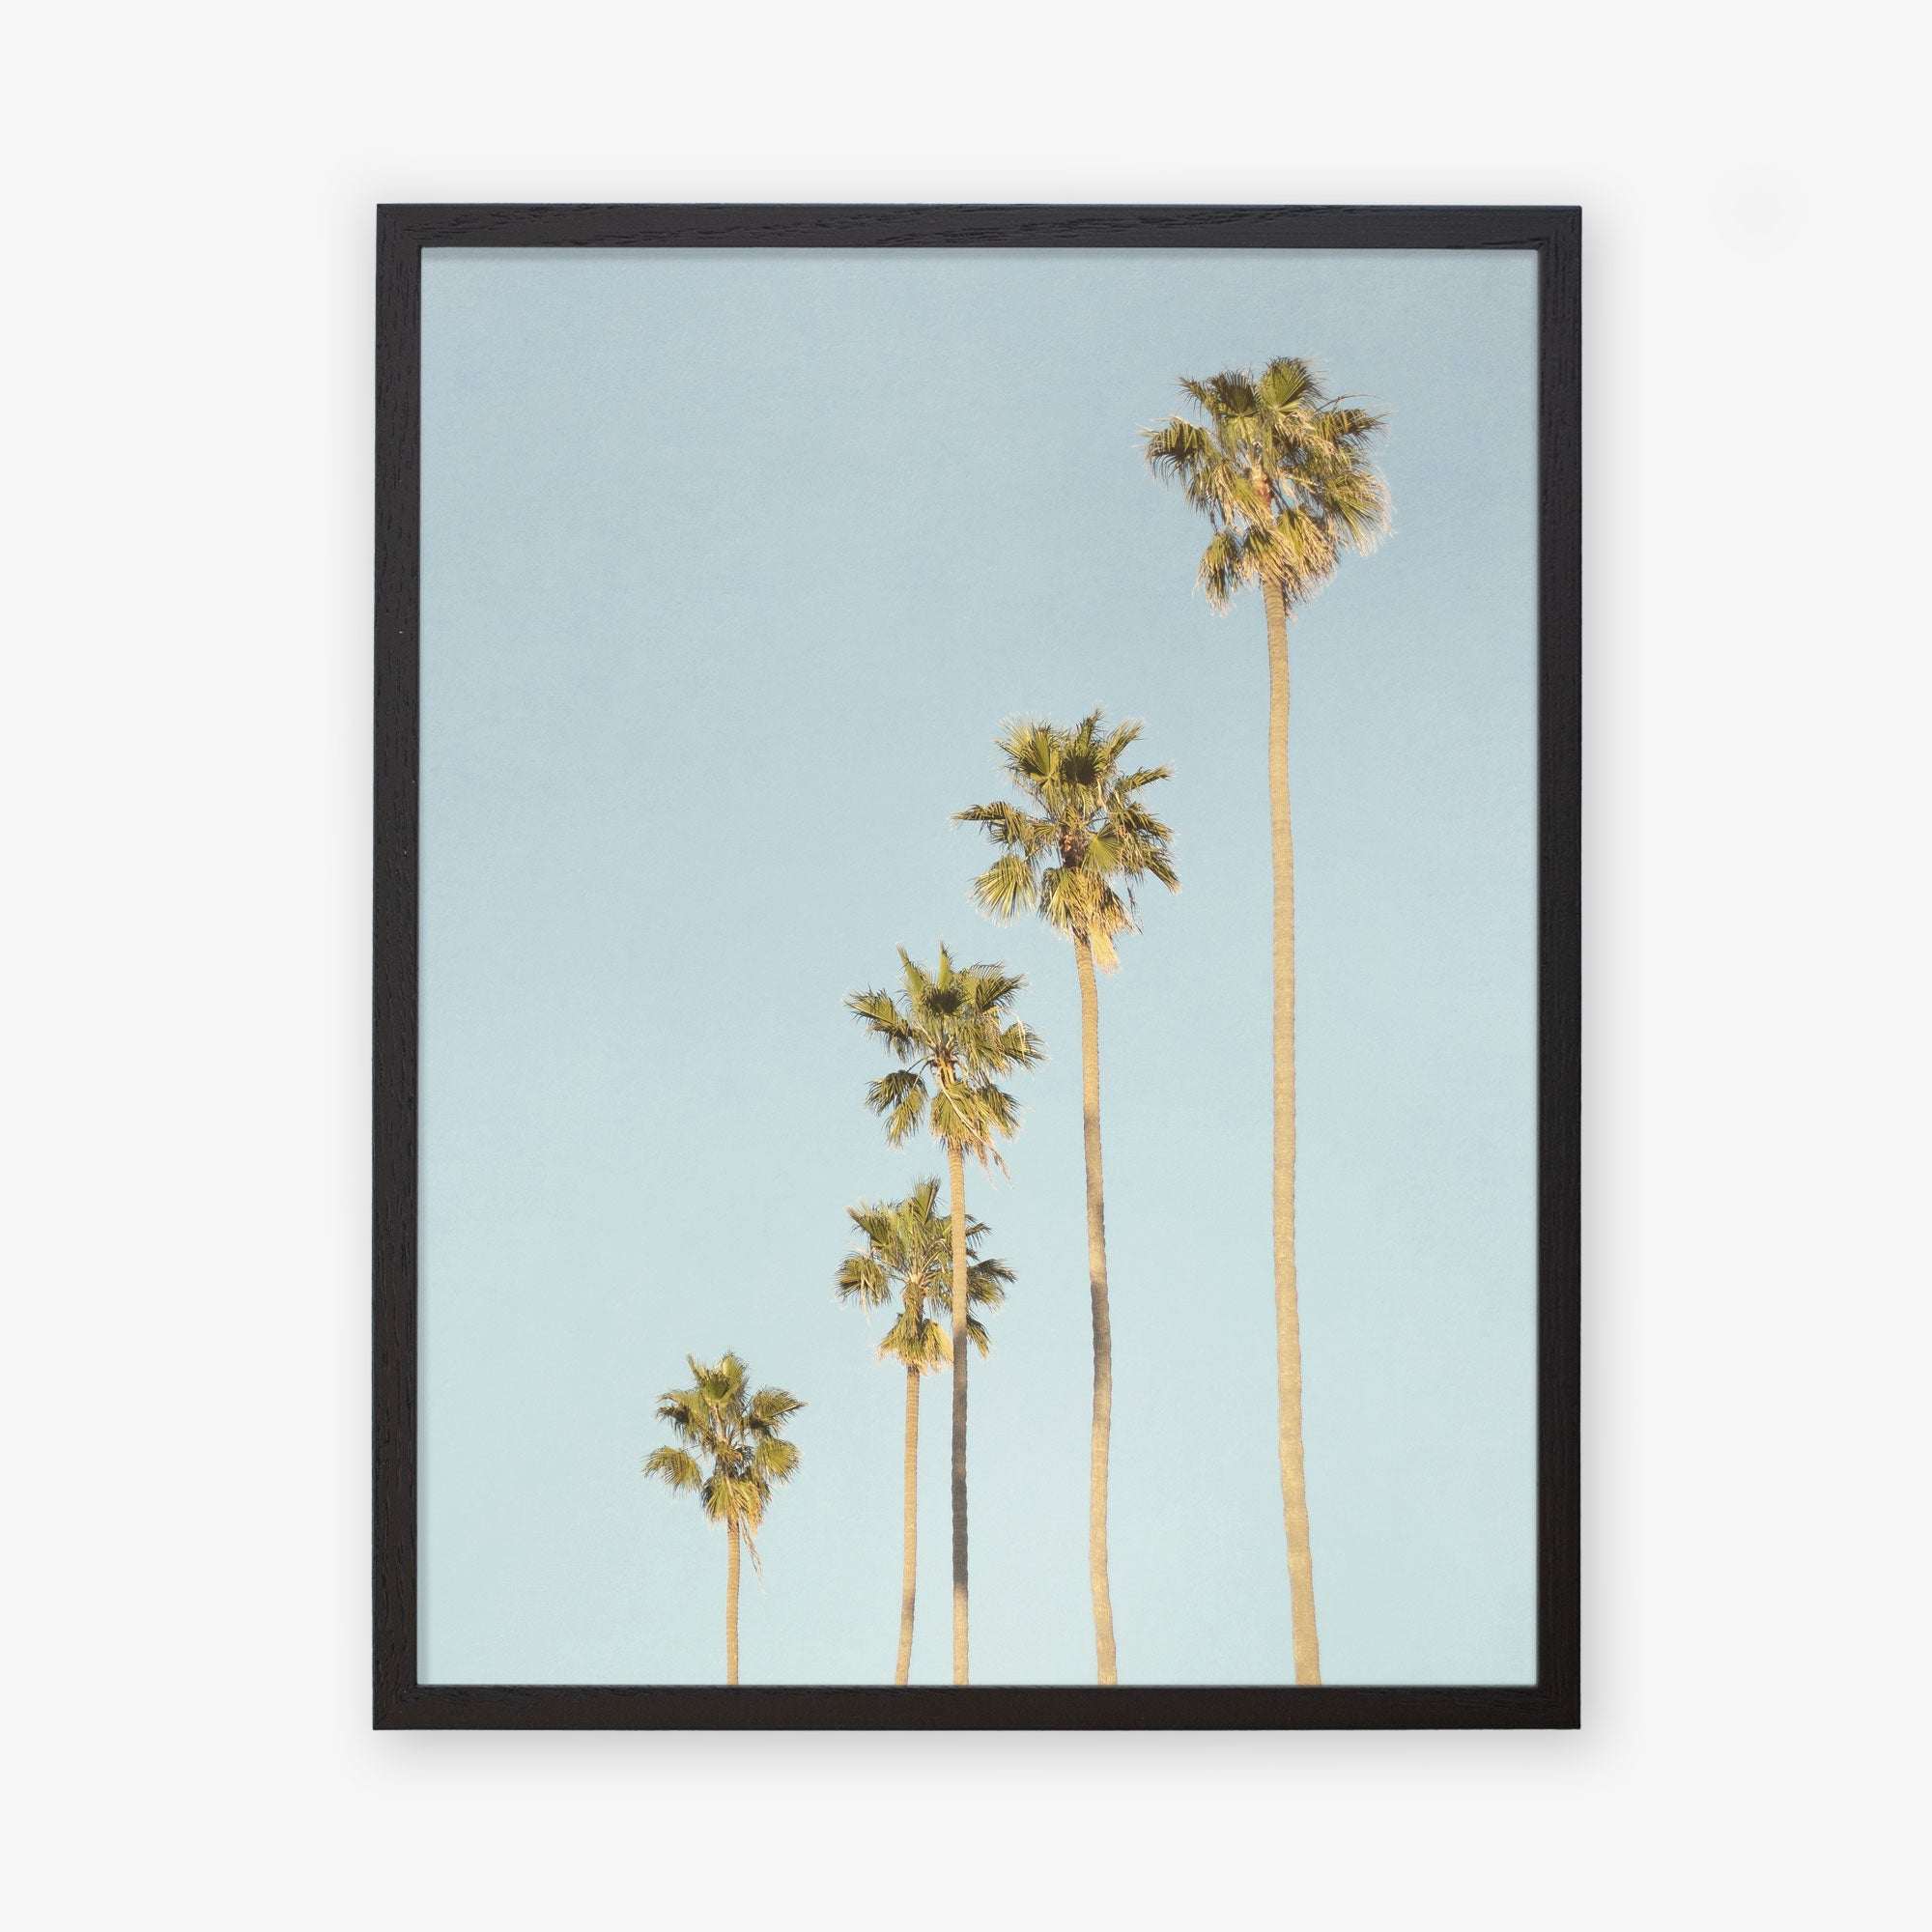 Framed photograph of five tall palm trees under a clear blue sky in a California style, viewed from a low angle, emphasizing their long trunks and lush, fluttering fronds - Los Angeles Palm Tree Photographic Print &#39;Palm Tree Steps&#39; by Offley Green